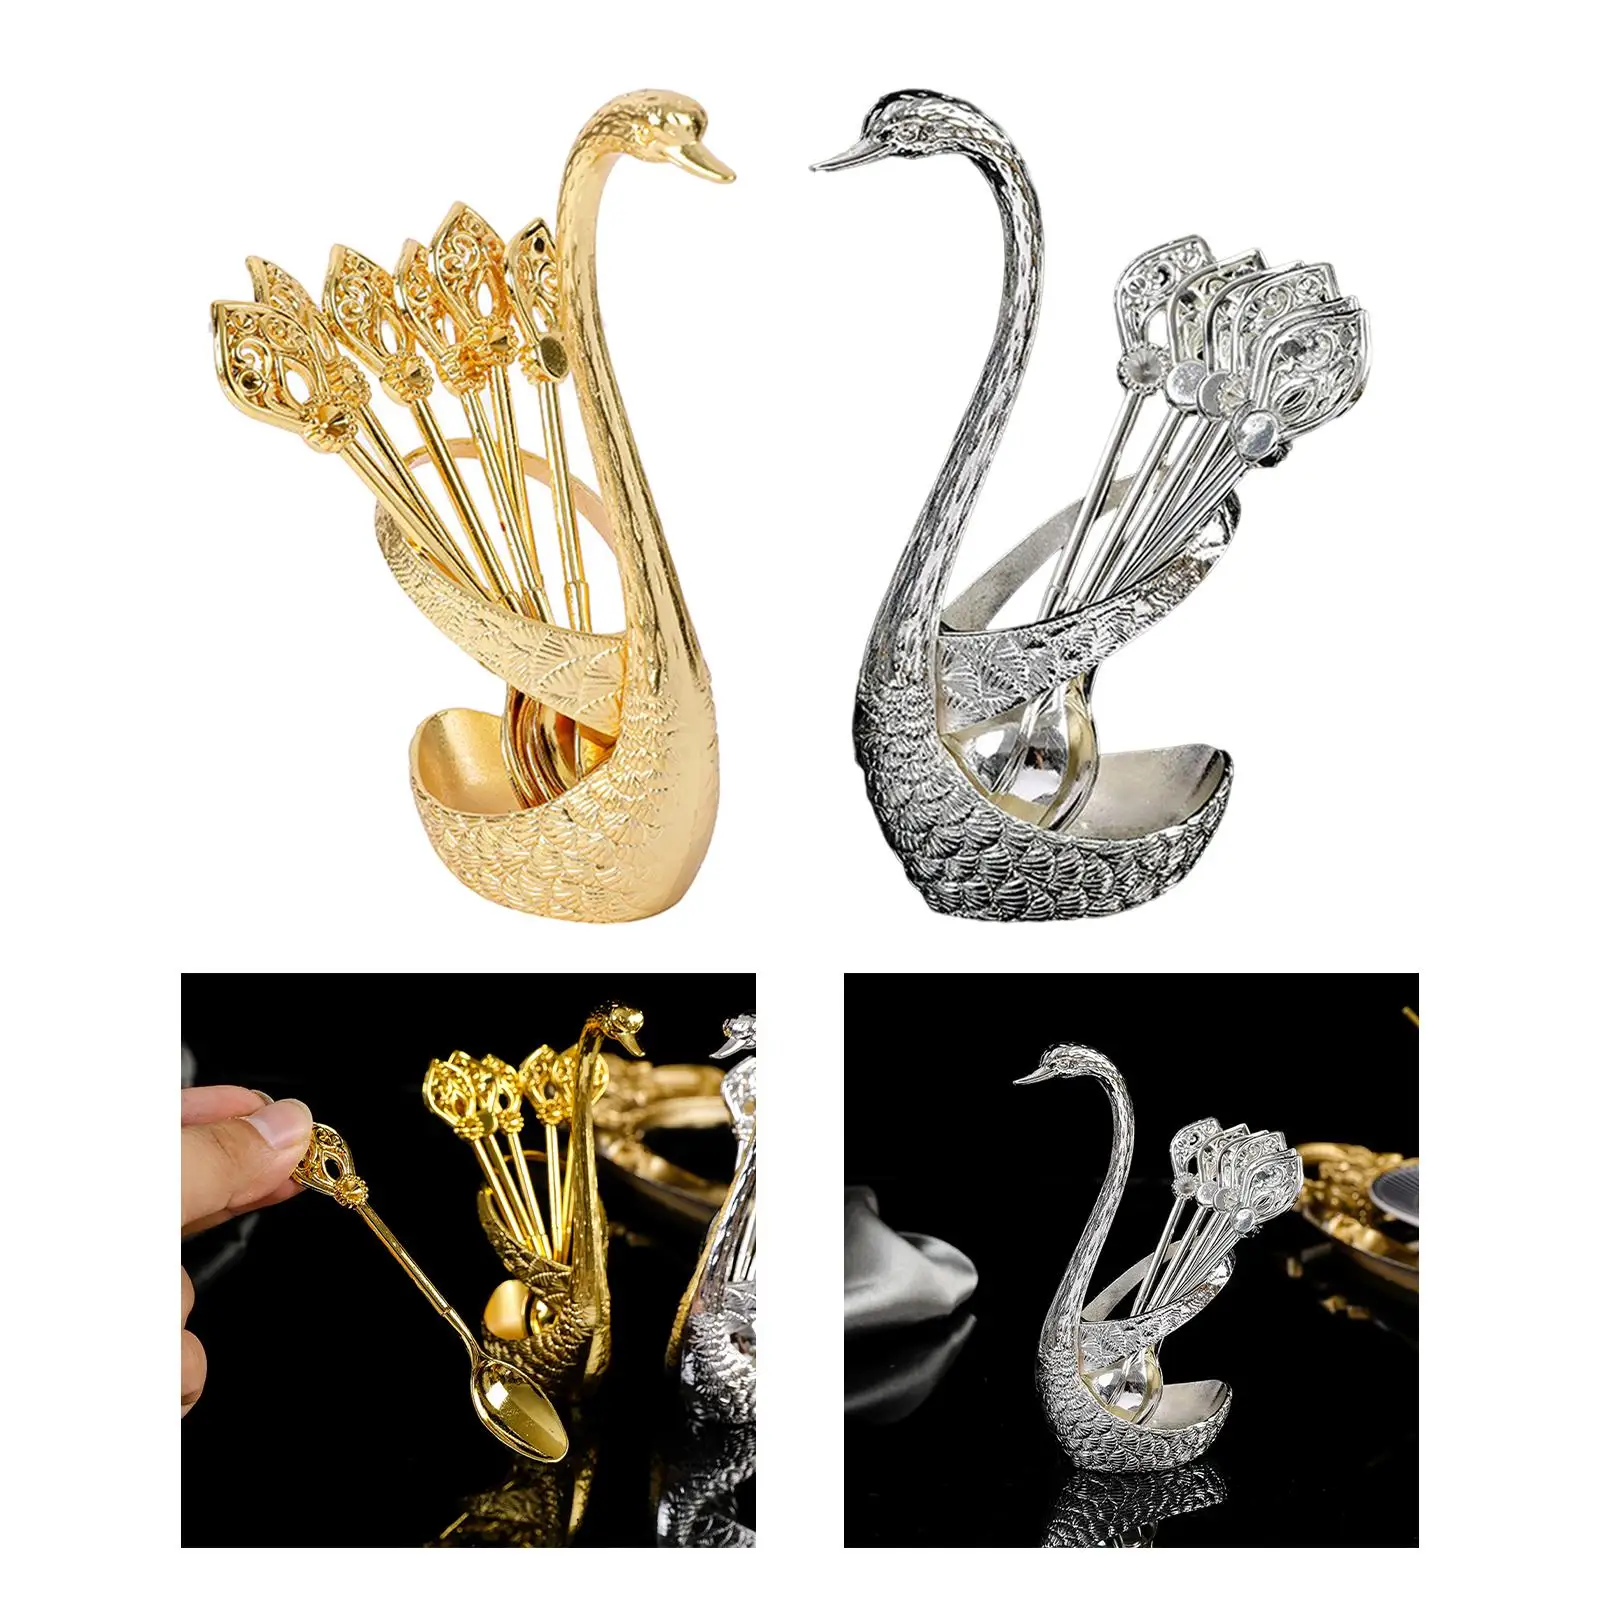 Dessert Spoon Set with 6Pcs Spoons Household Tableware Decorative Swan Base Holder for Ice Cream Coffee Stirring